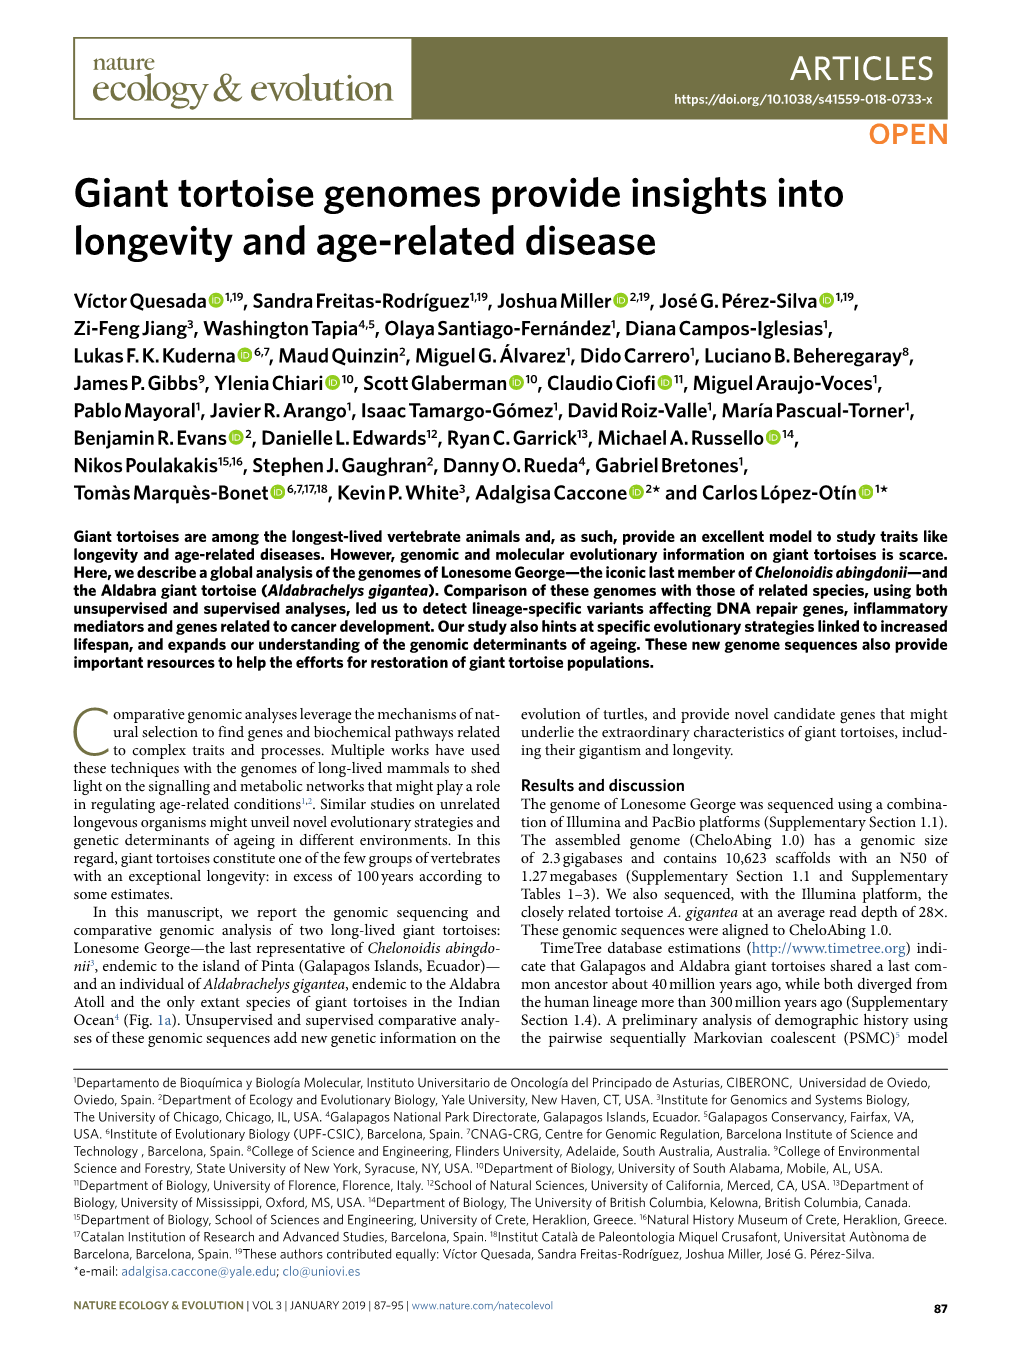 Giant Tortoise Genomes Provide Insights Into Longevity and Age-Related Disease